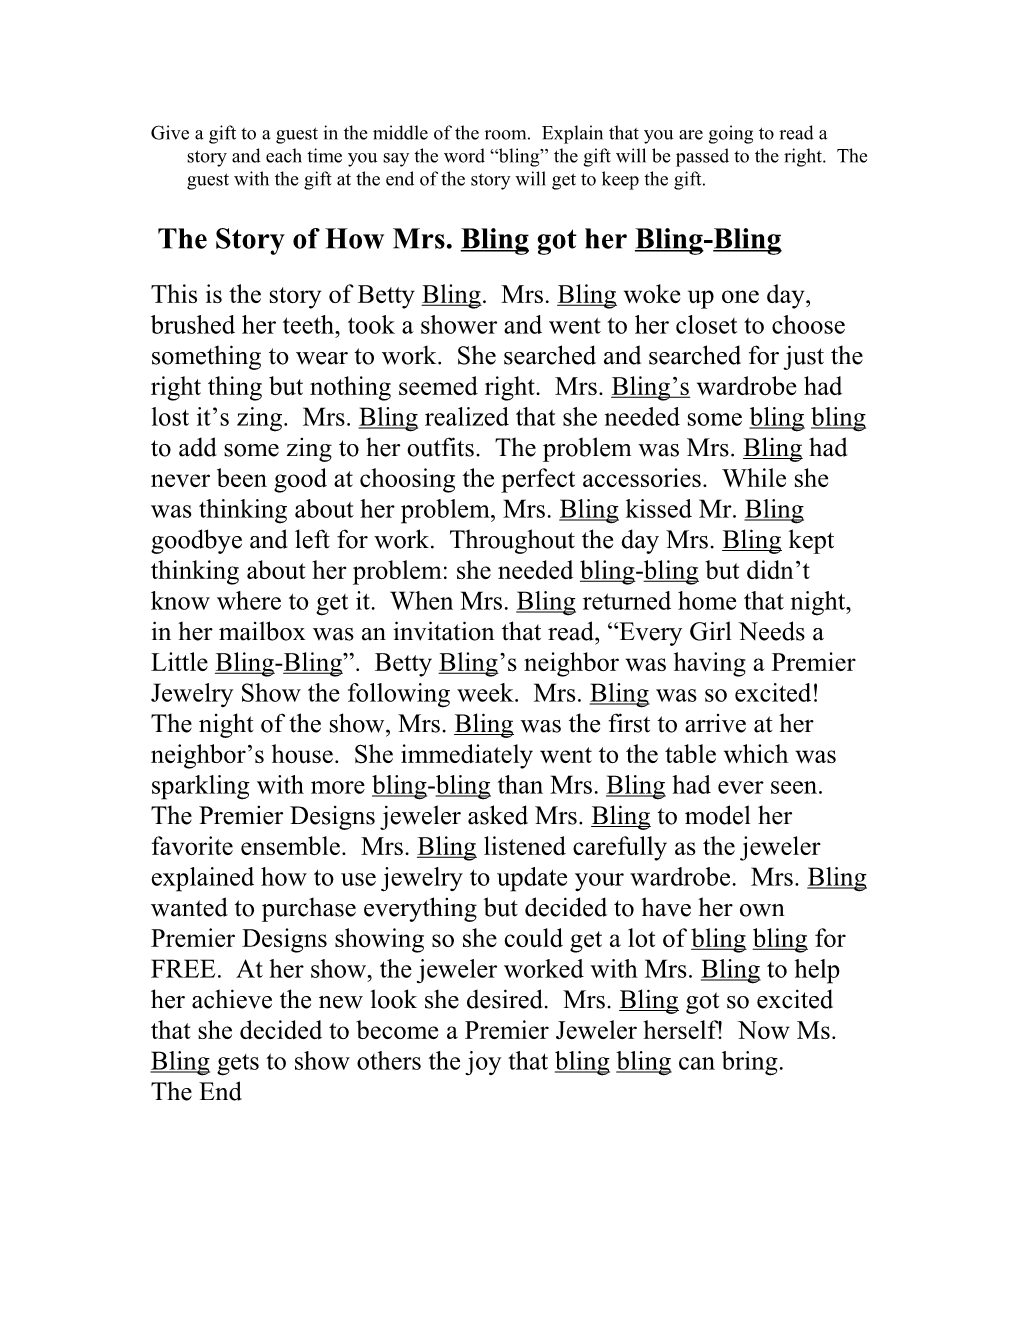 This Is the Story of Betty Bling